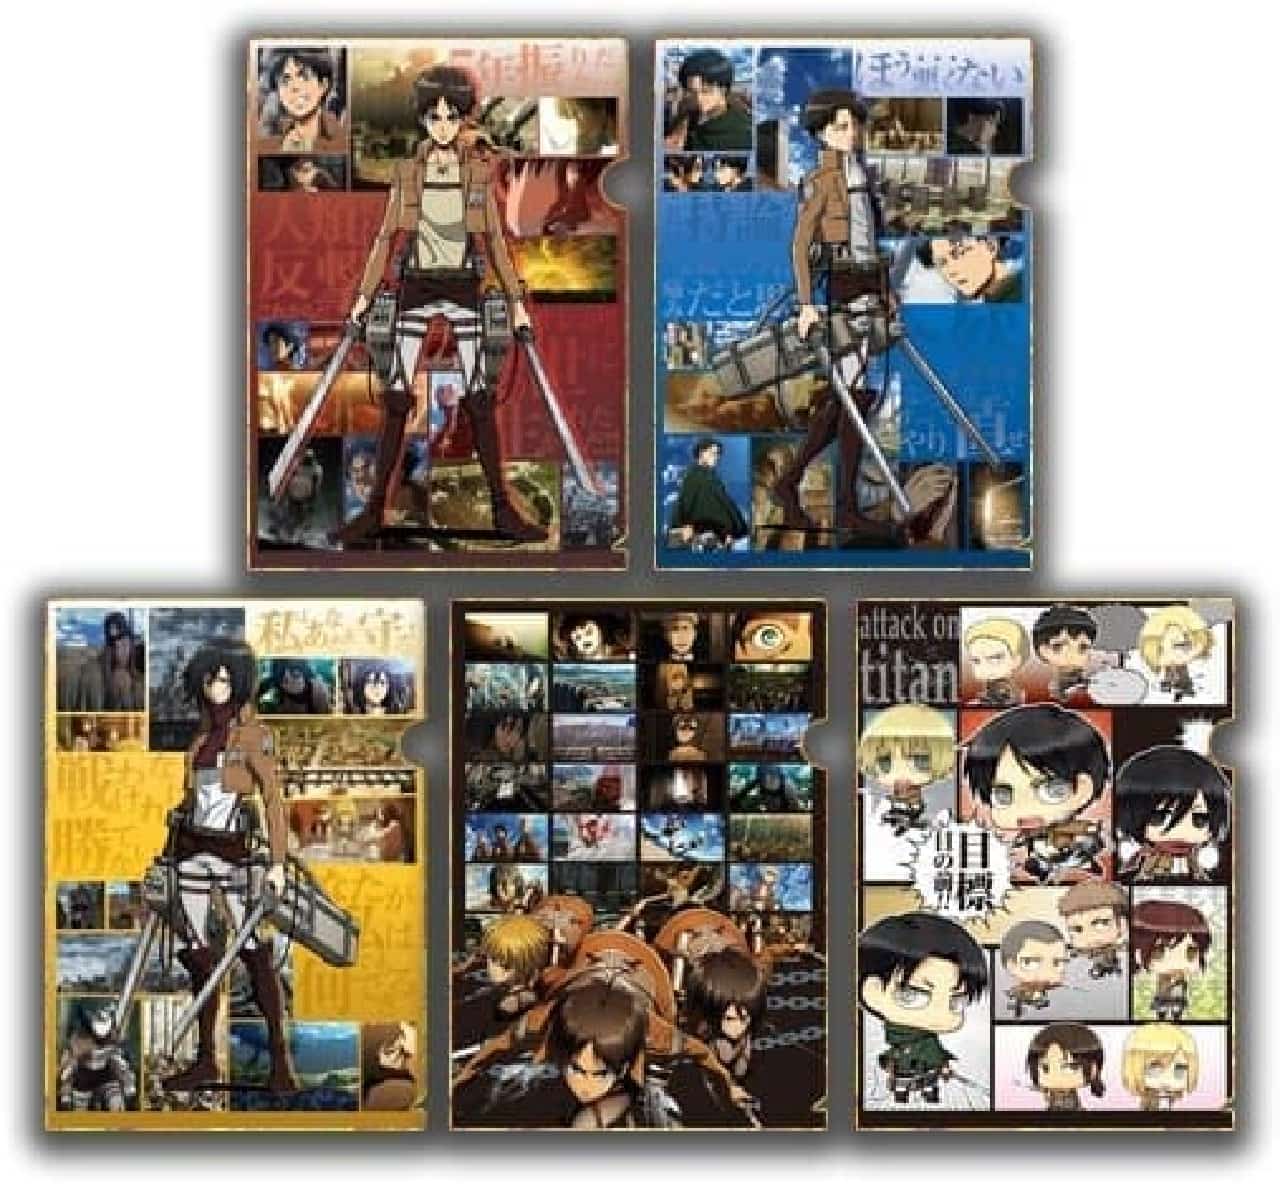 5 types of original clear files that you can get by purchasing 2 target sweets